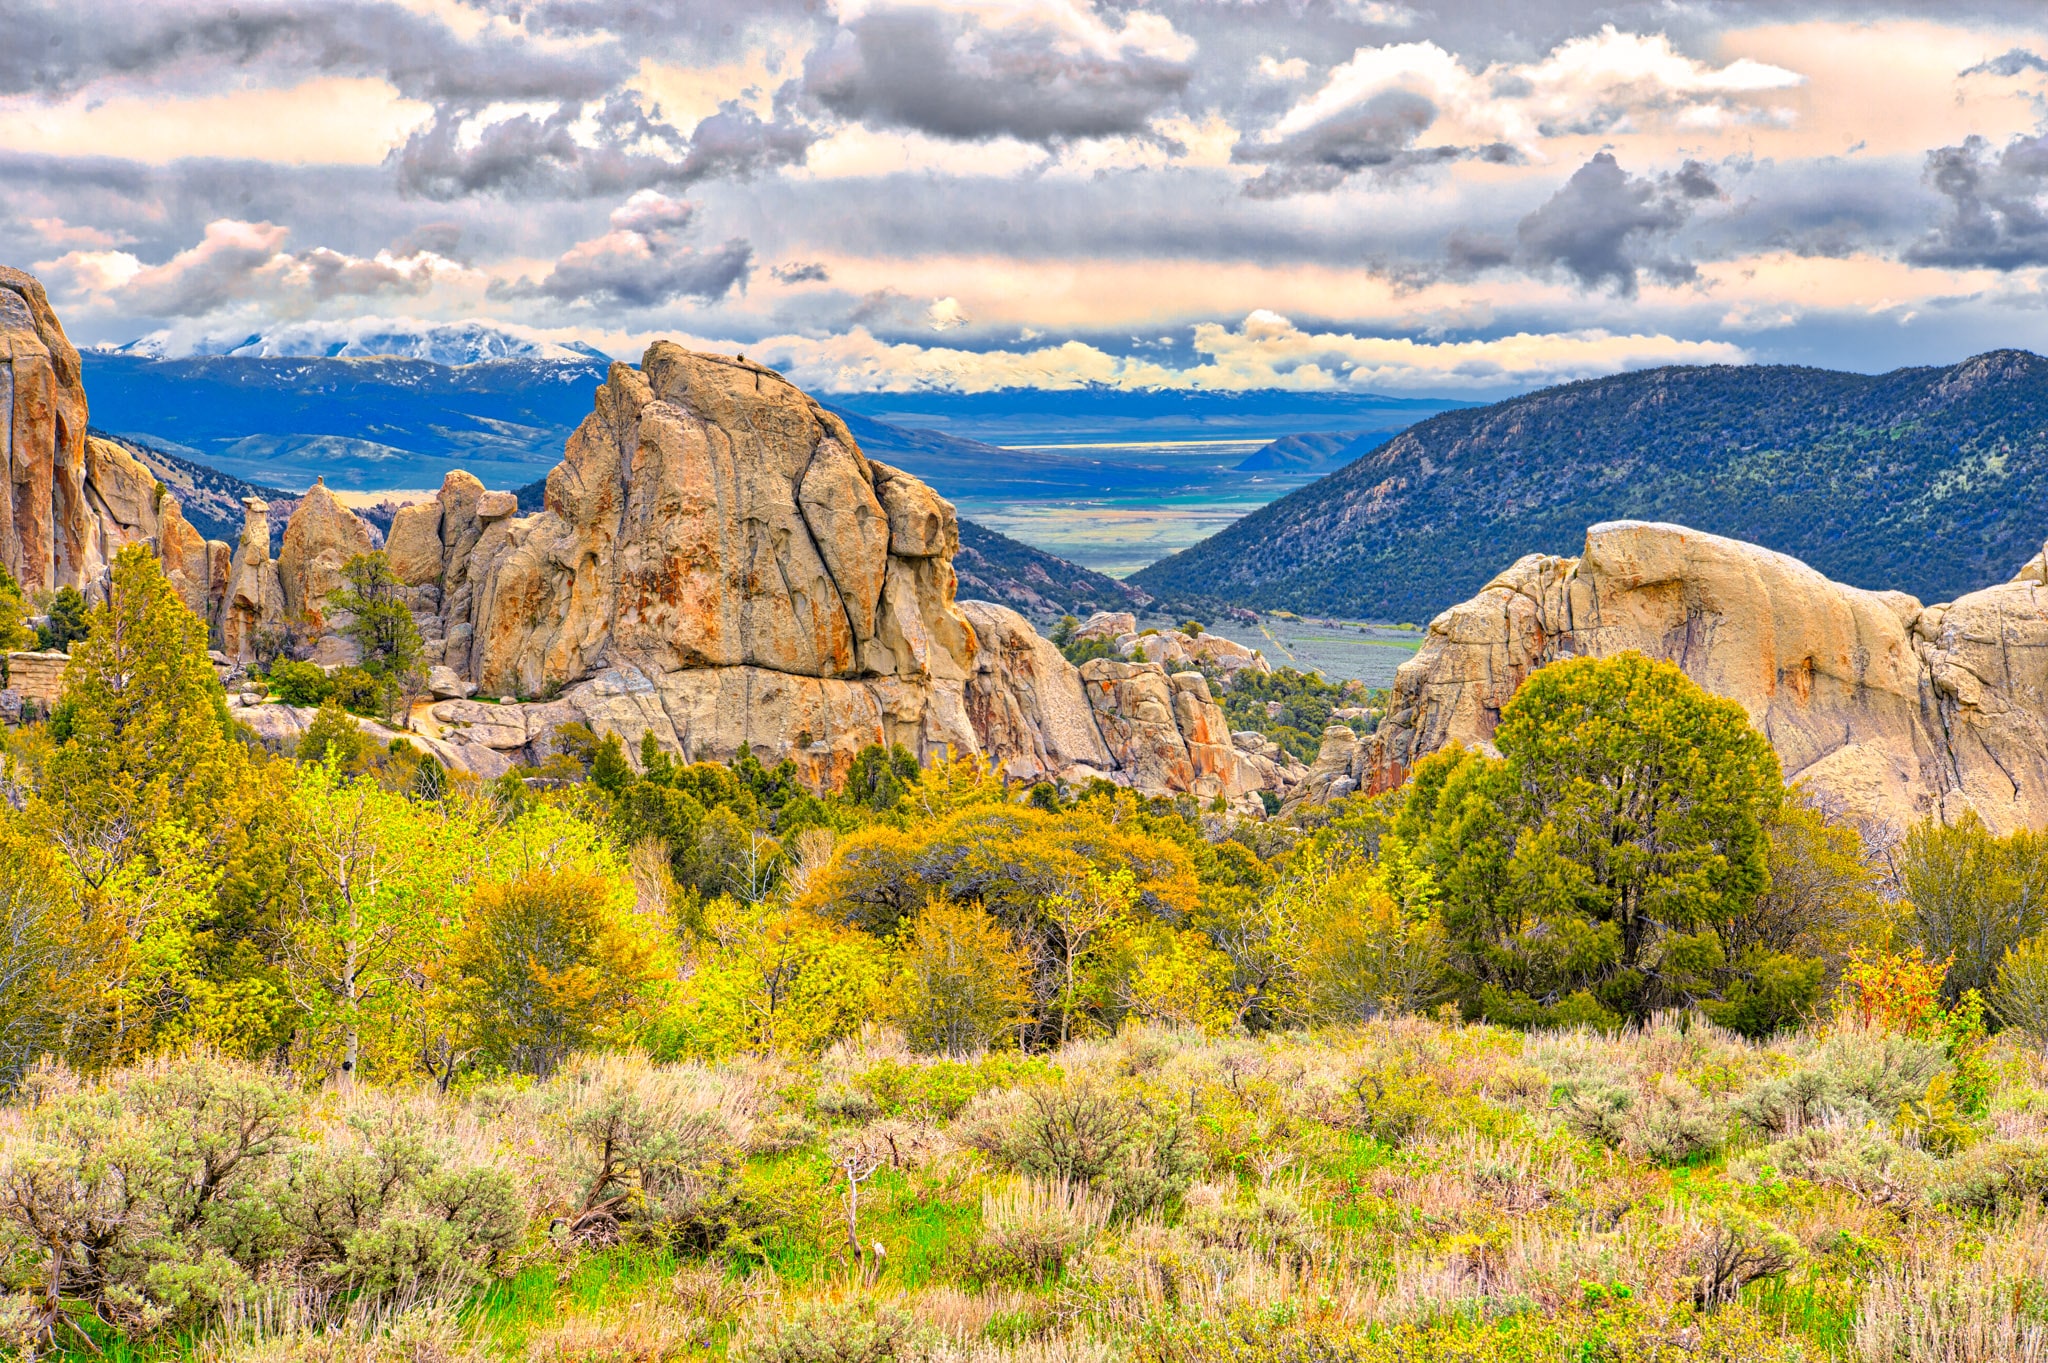 Snow and rain clouds roll over the Albion Mountains approaching the granite formation in City of Rocks National Reserve, near Almo, Idaho.